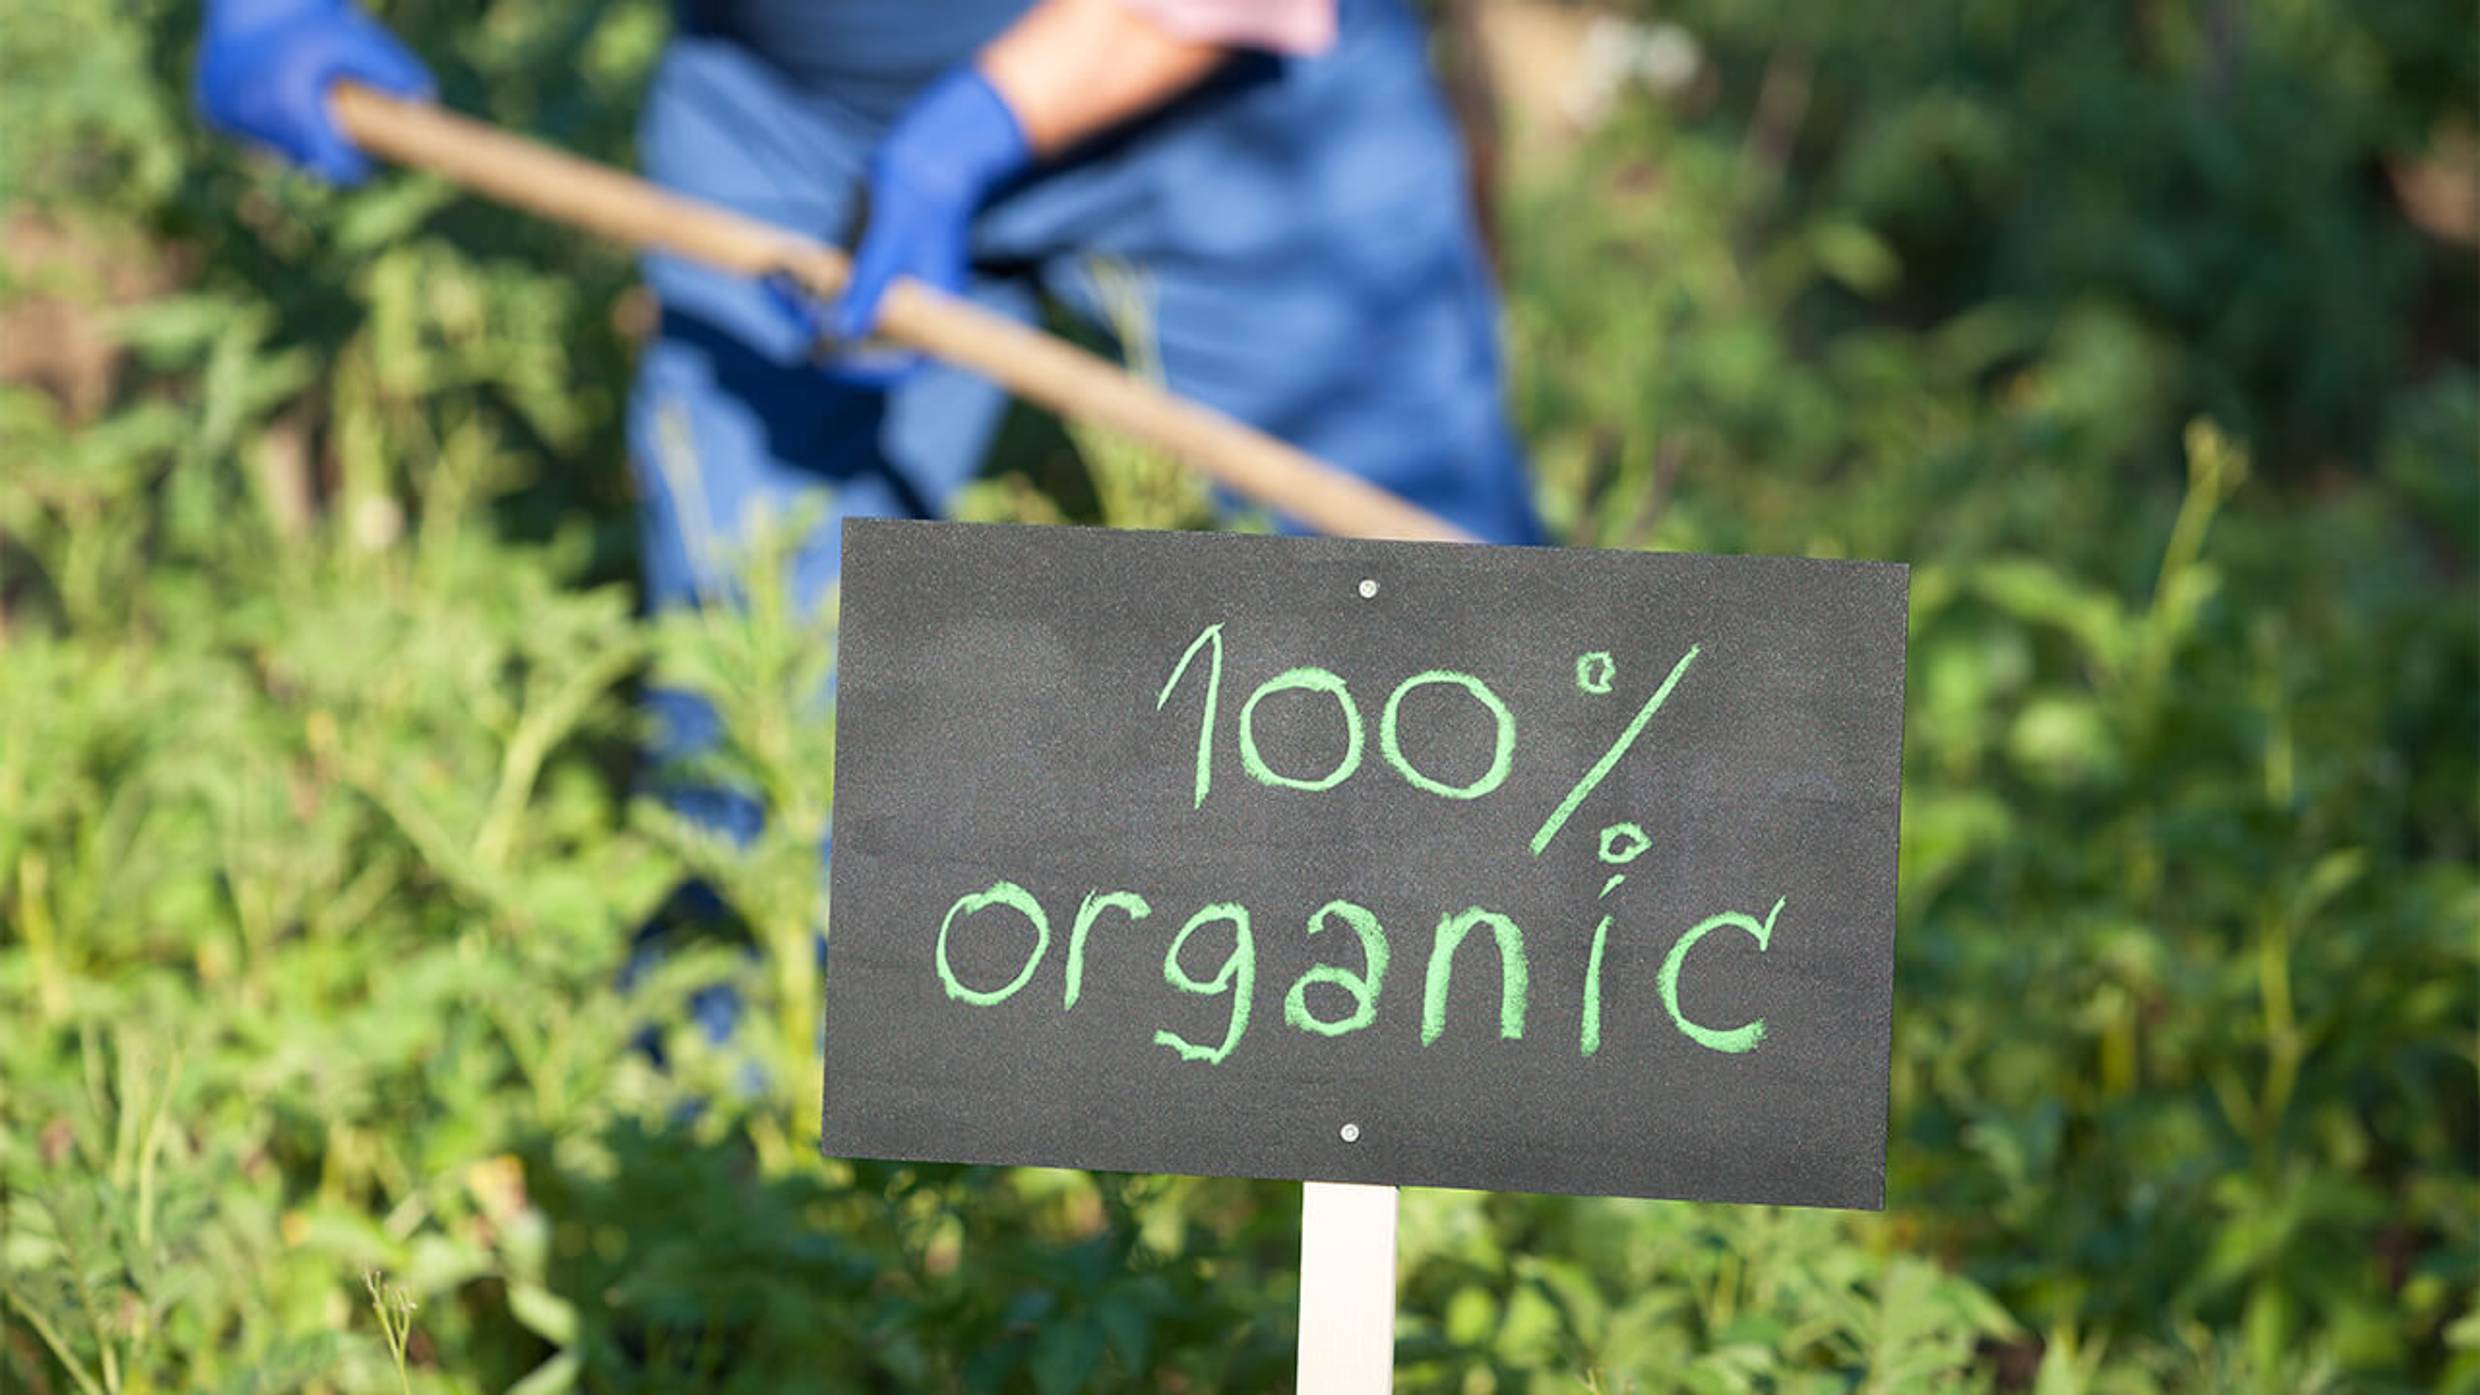 Why choose certified organic products over others?